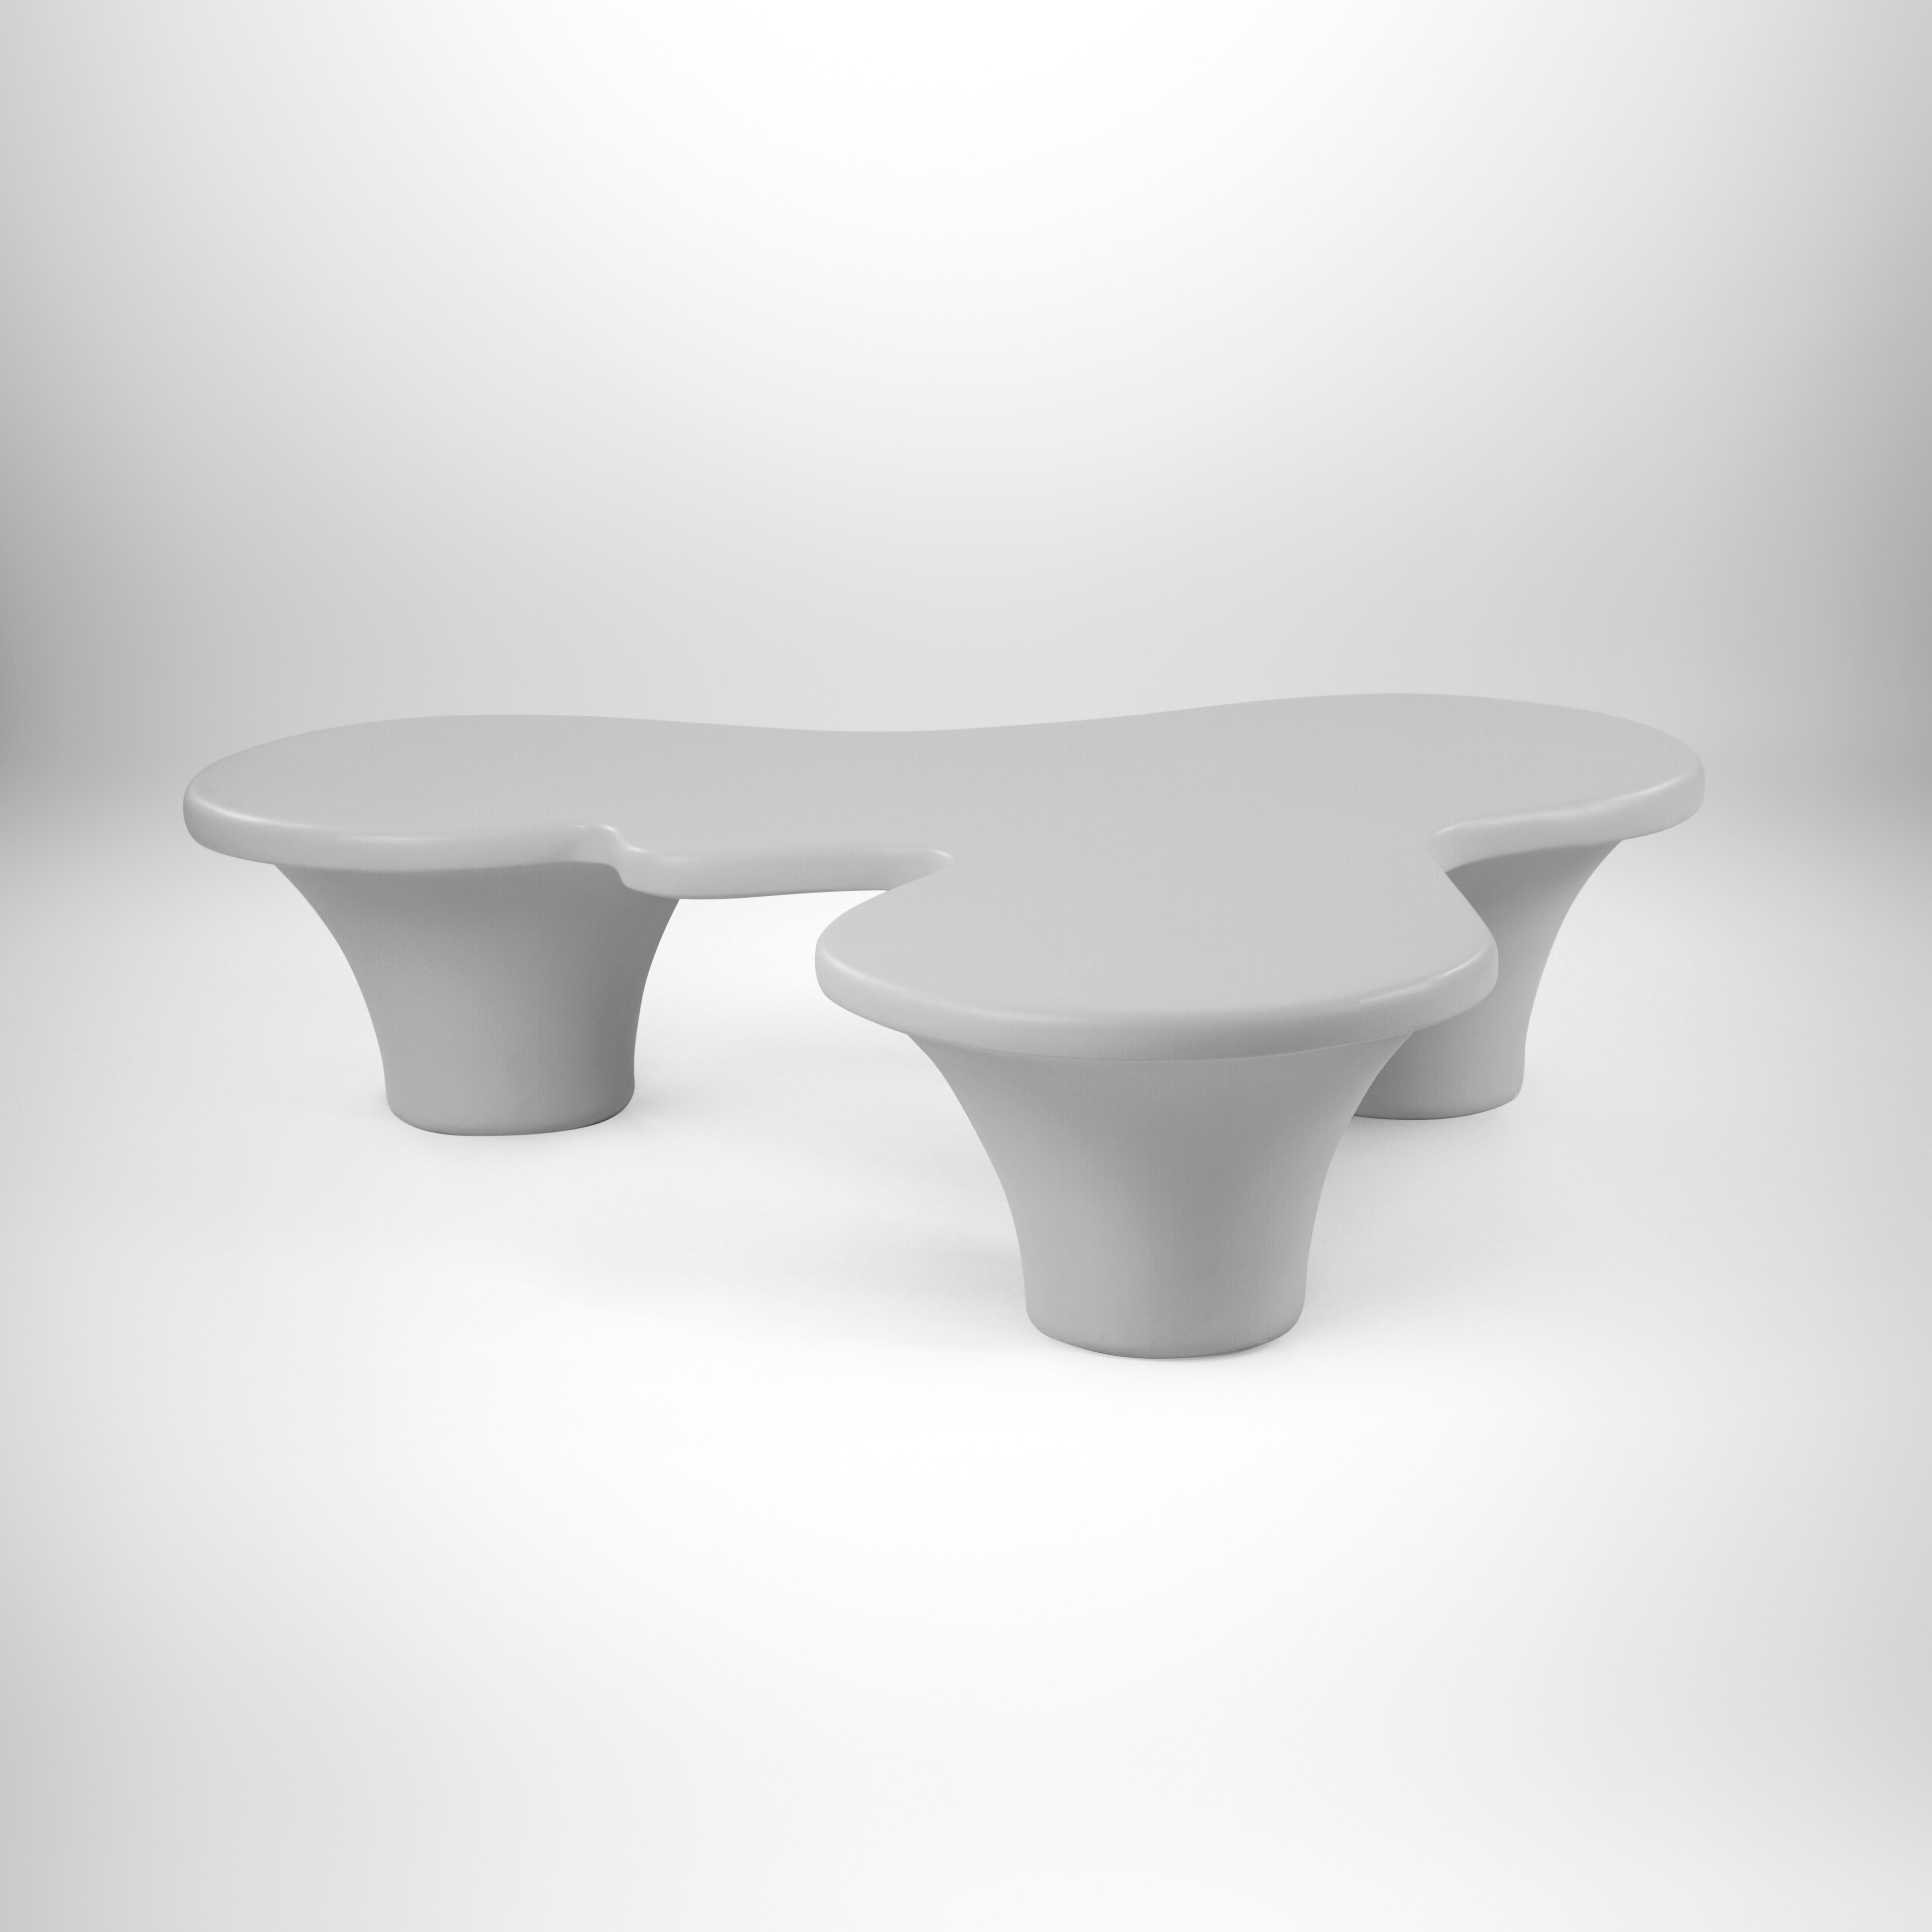 Organic-Shaped Weather-Resistant Fiberglass Outdoor coffee table - Grey.
Not just sublime but also a very practical outdoor coffee table. Its cloud-inspired surface area allows for maximum coverage and reach. Soft edges and receding legs make it